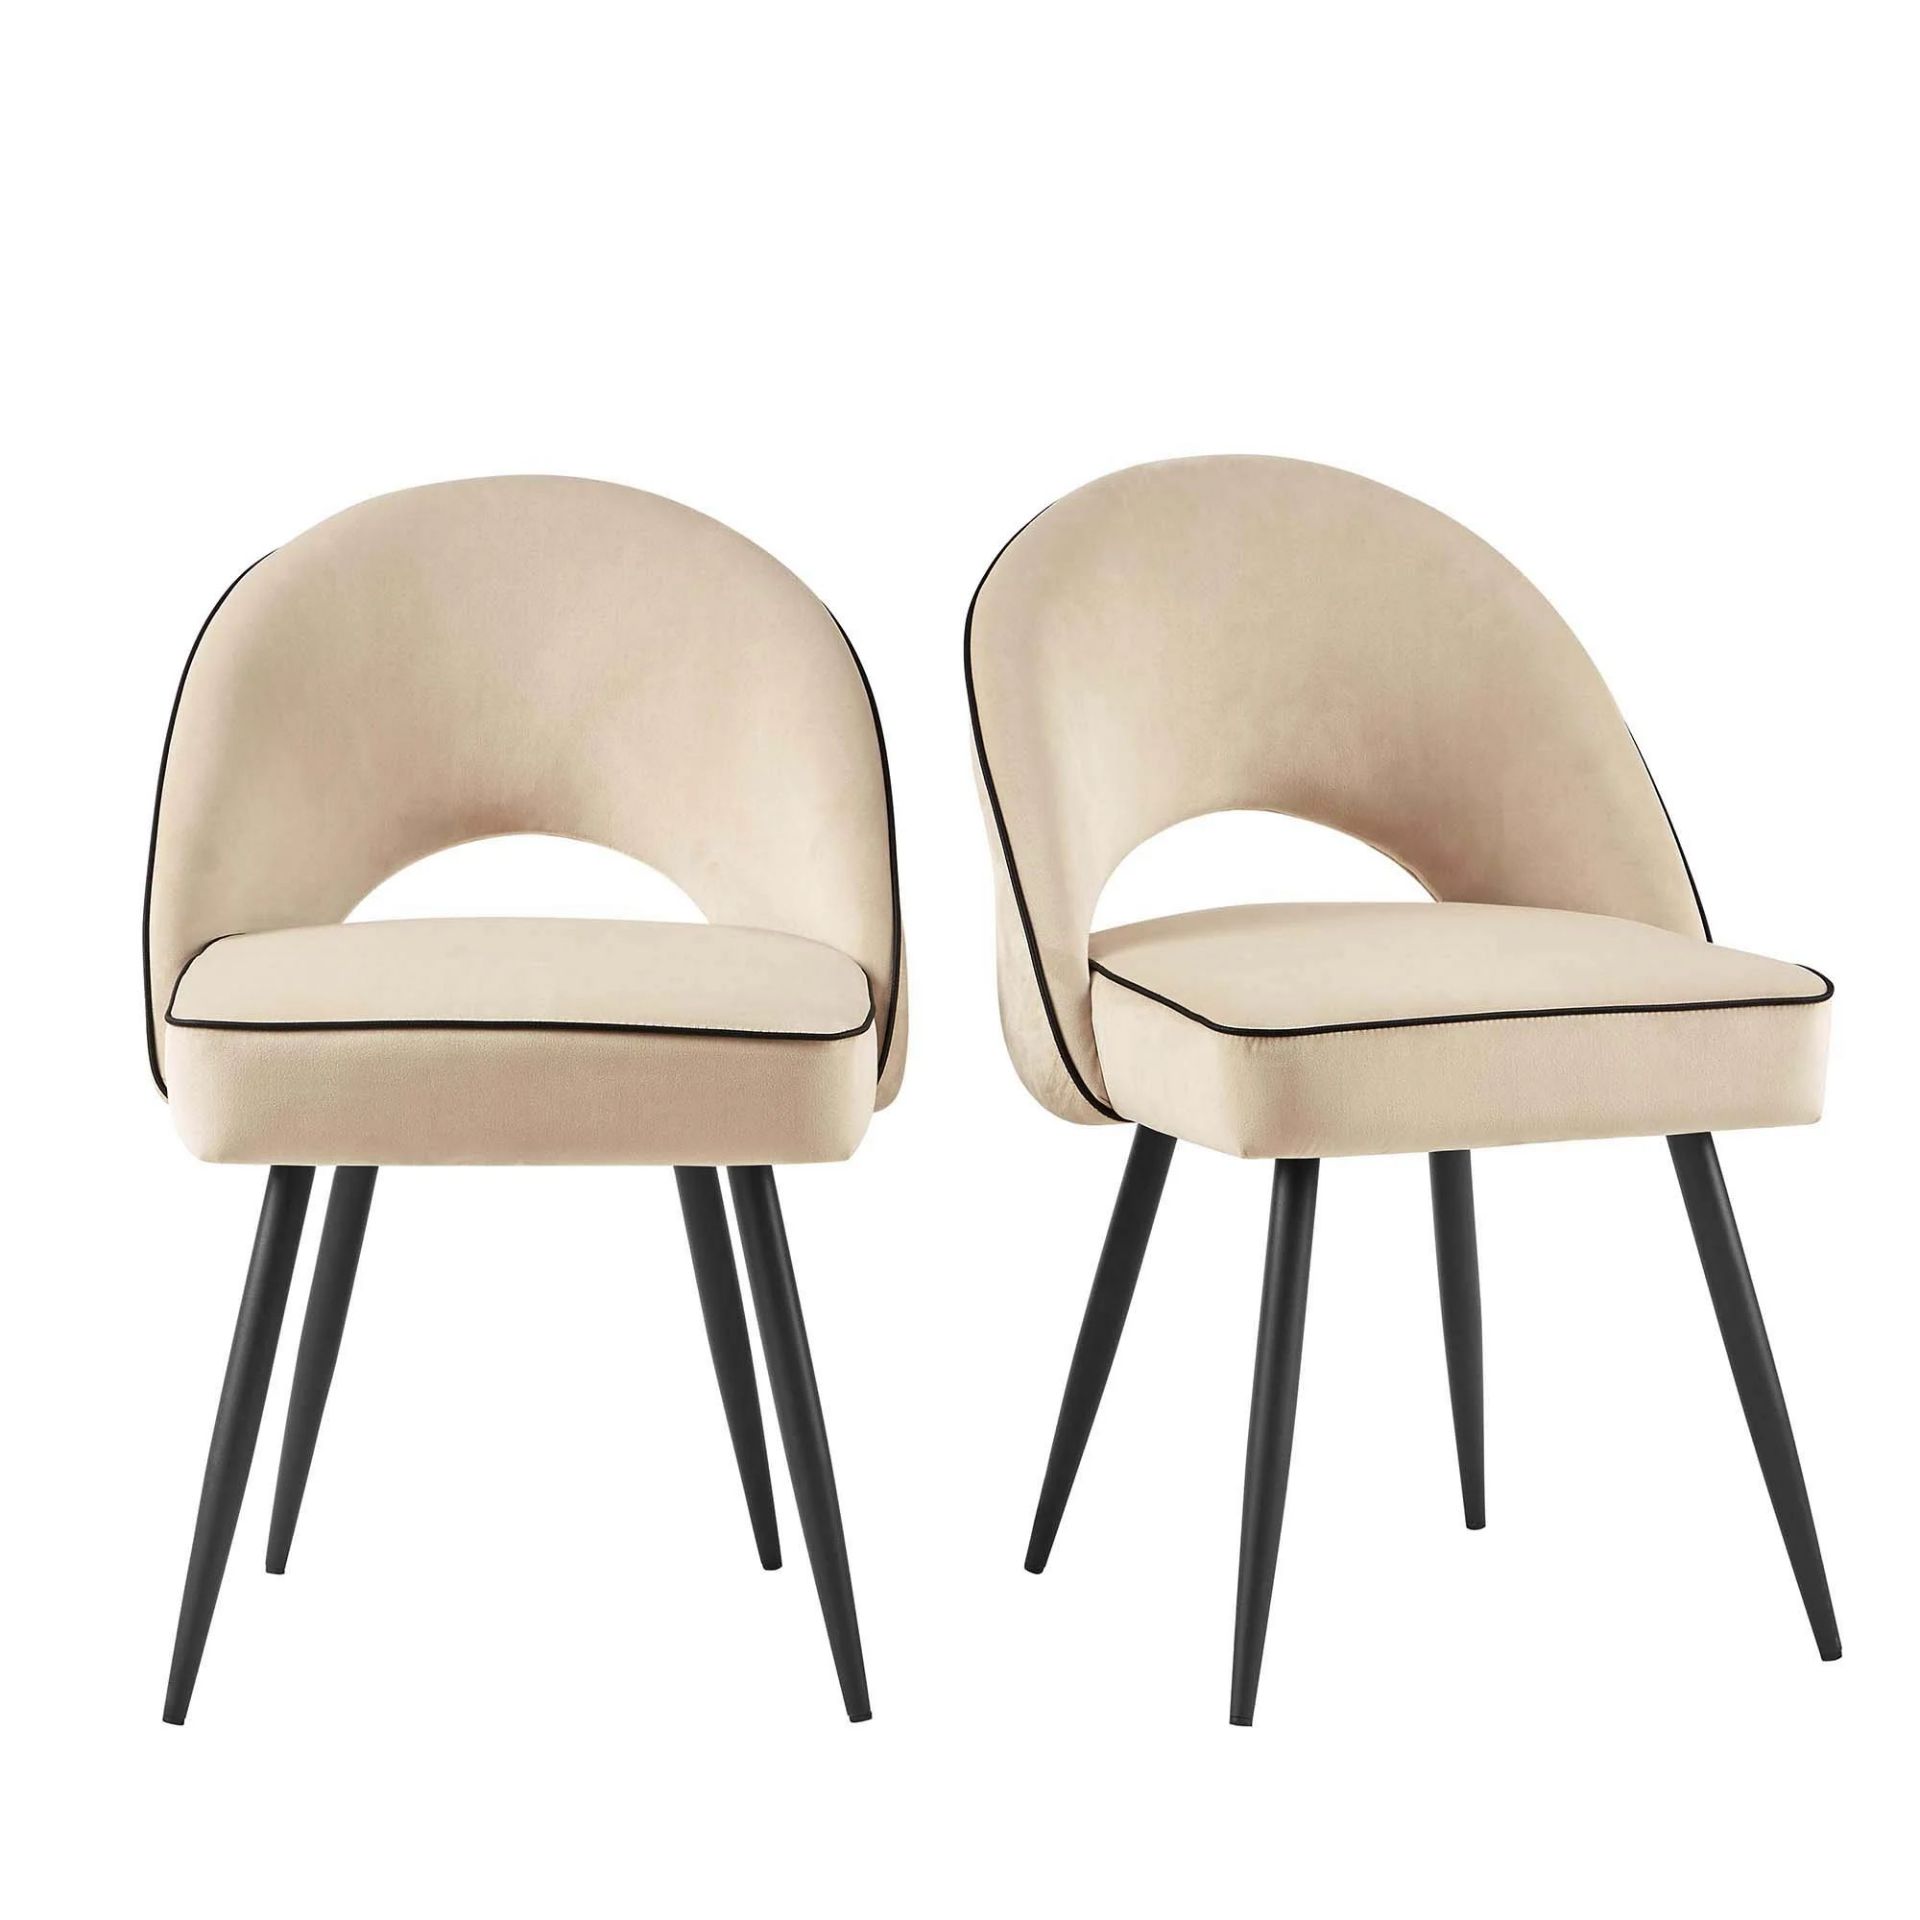 Oakley Set of 2 Champagne Velvet Upholstered Dining Chairs with Contrast Piping. - R14. RRP £269.99.